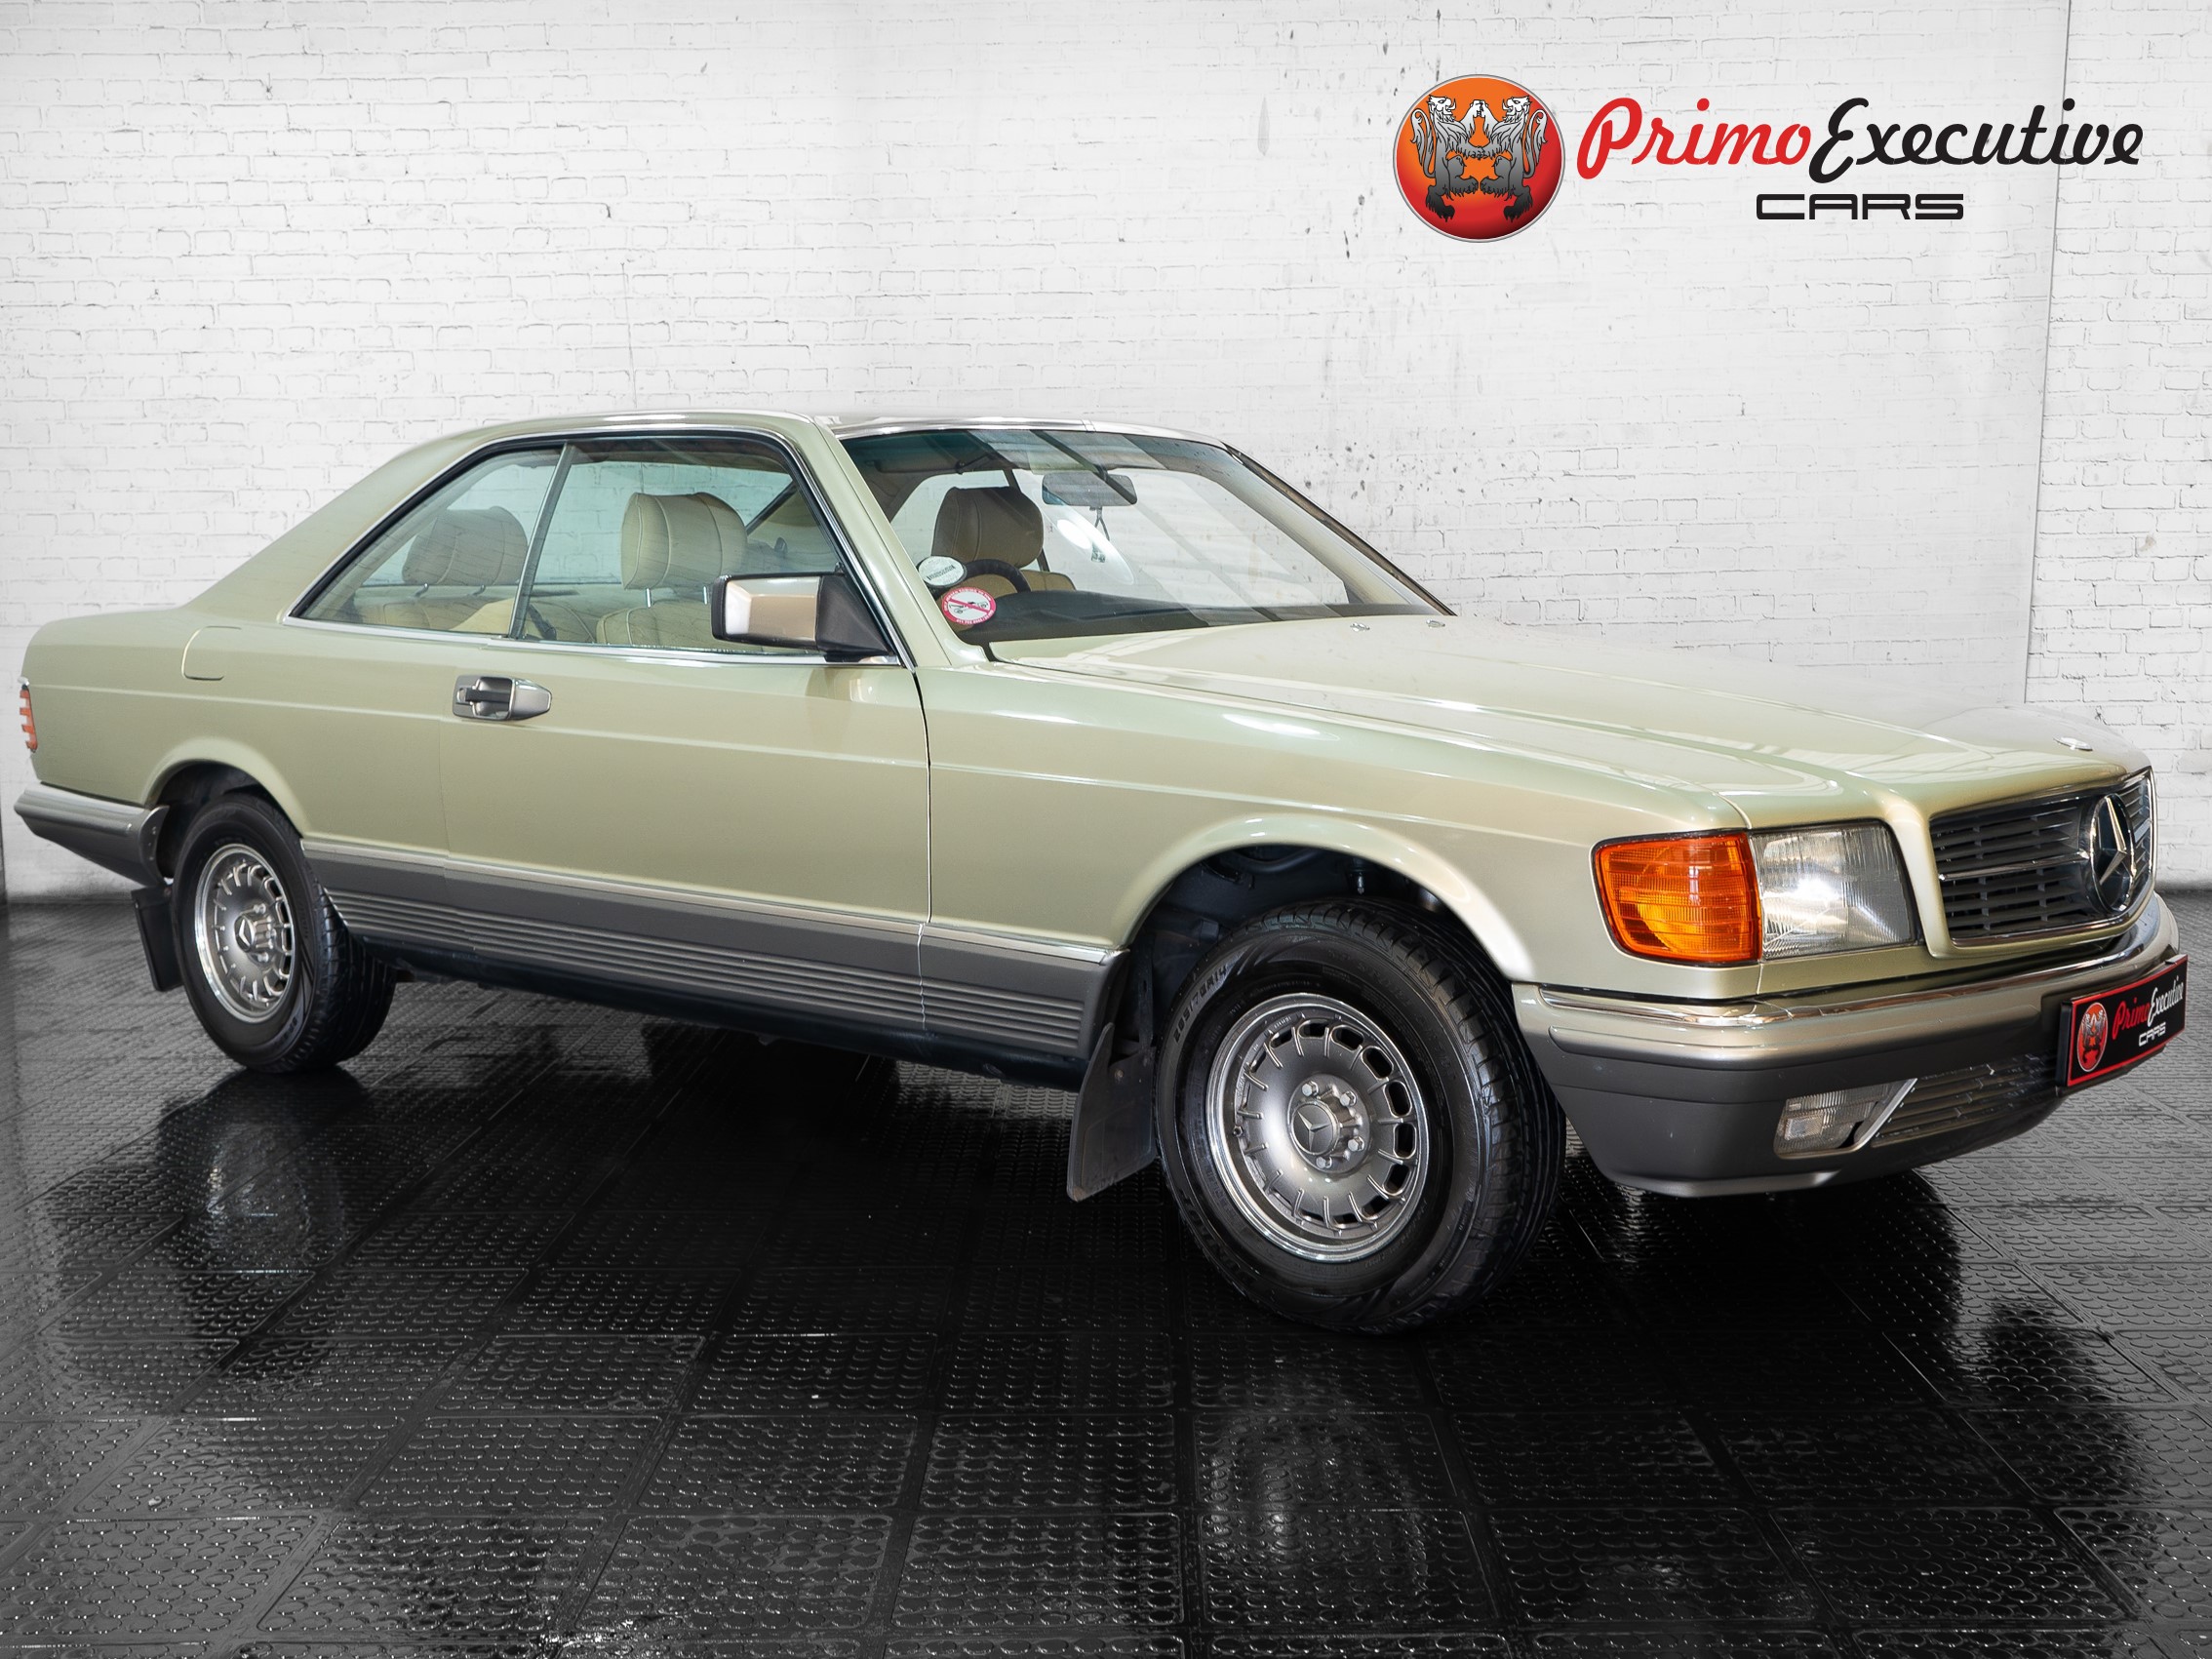 1983 Mercedes-Benz 380  for sale - 510630